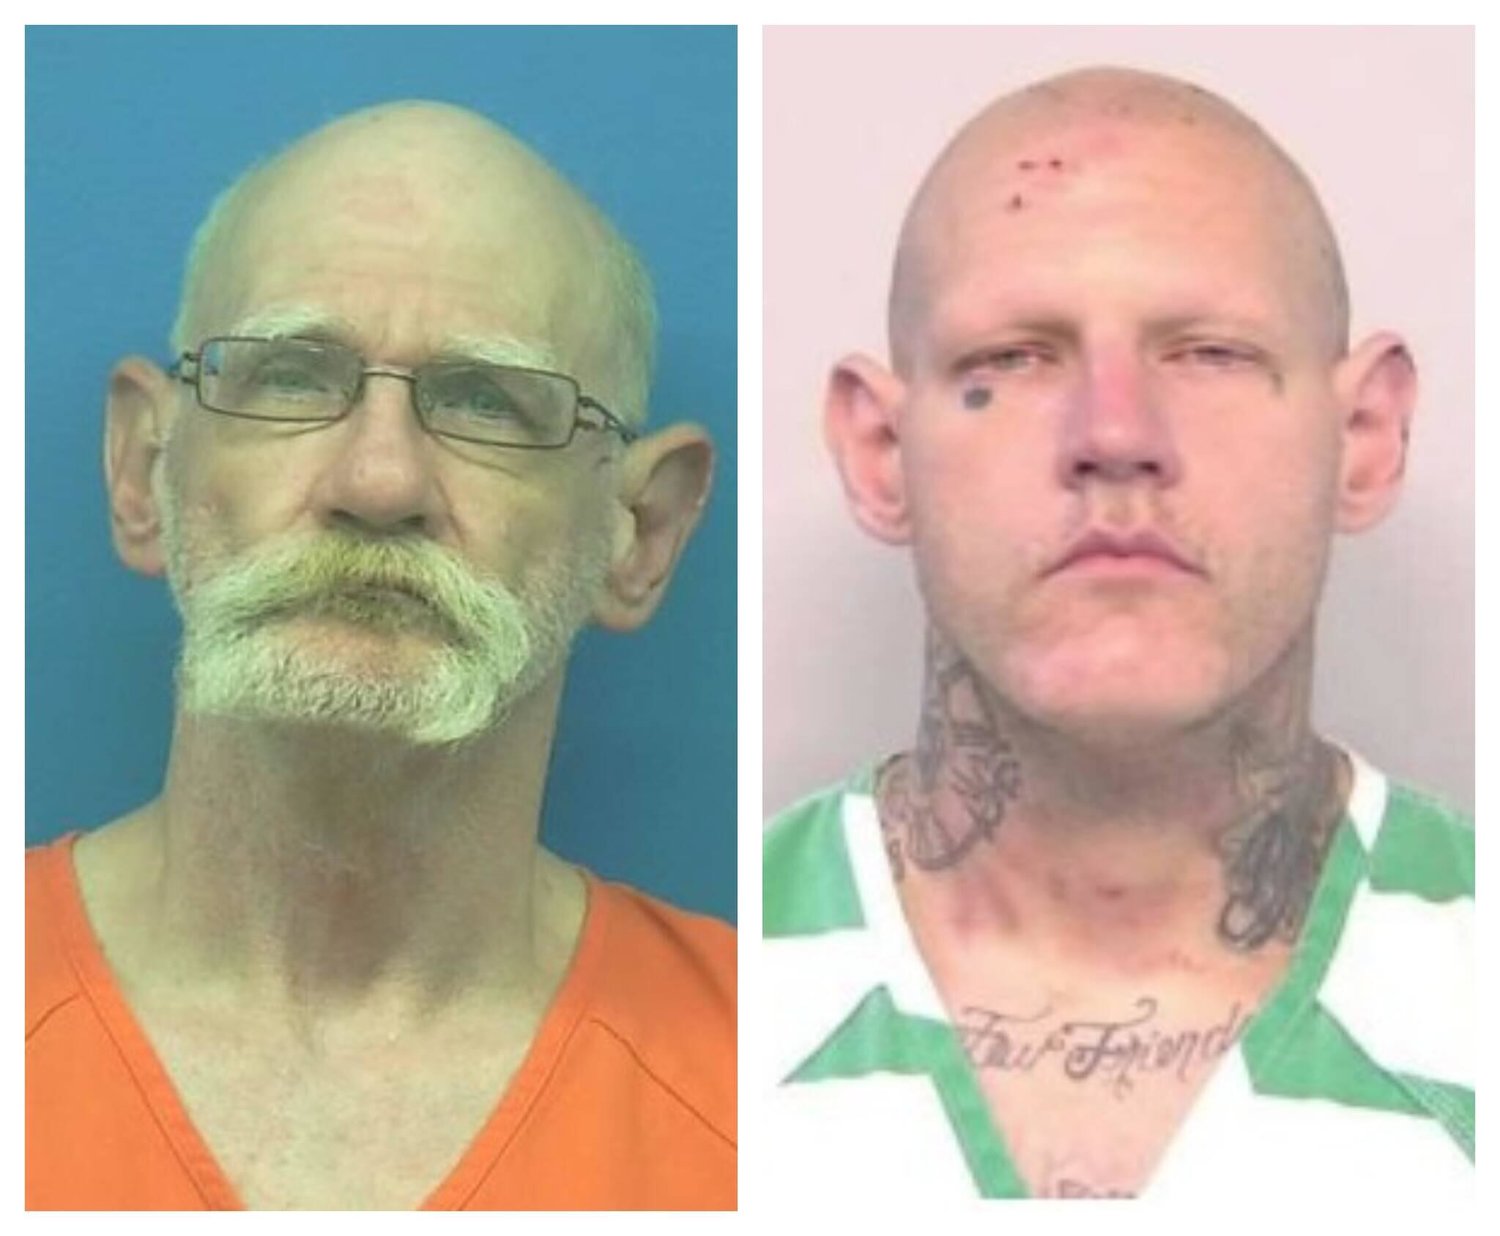 Rufus A. Phelps III, left, was taken peacefully into custody in Seattle in connection with a Monday shooting death in Moclips on Wednesday afternoon. His son, Rufus A. Phelps IV, is pictured at right.